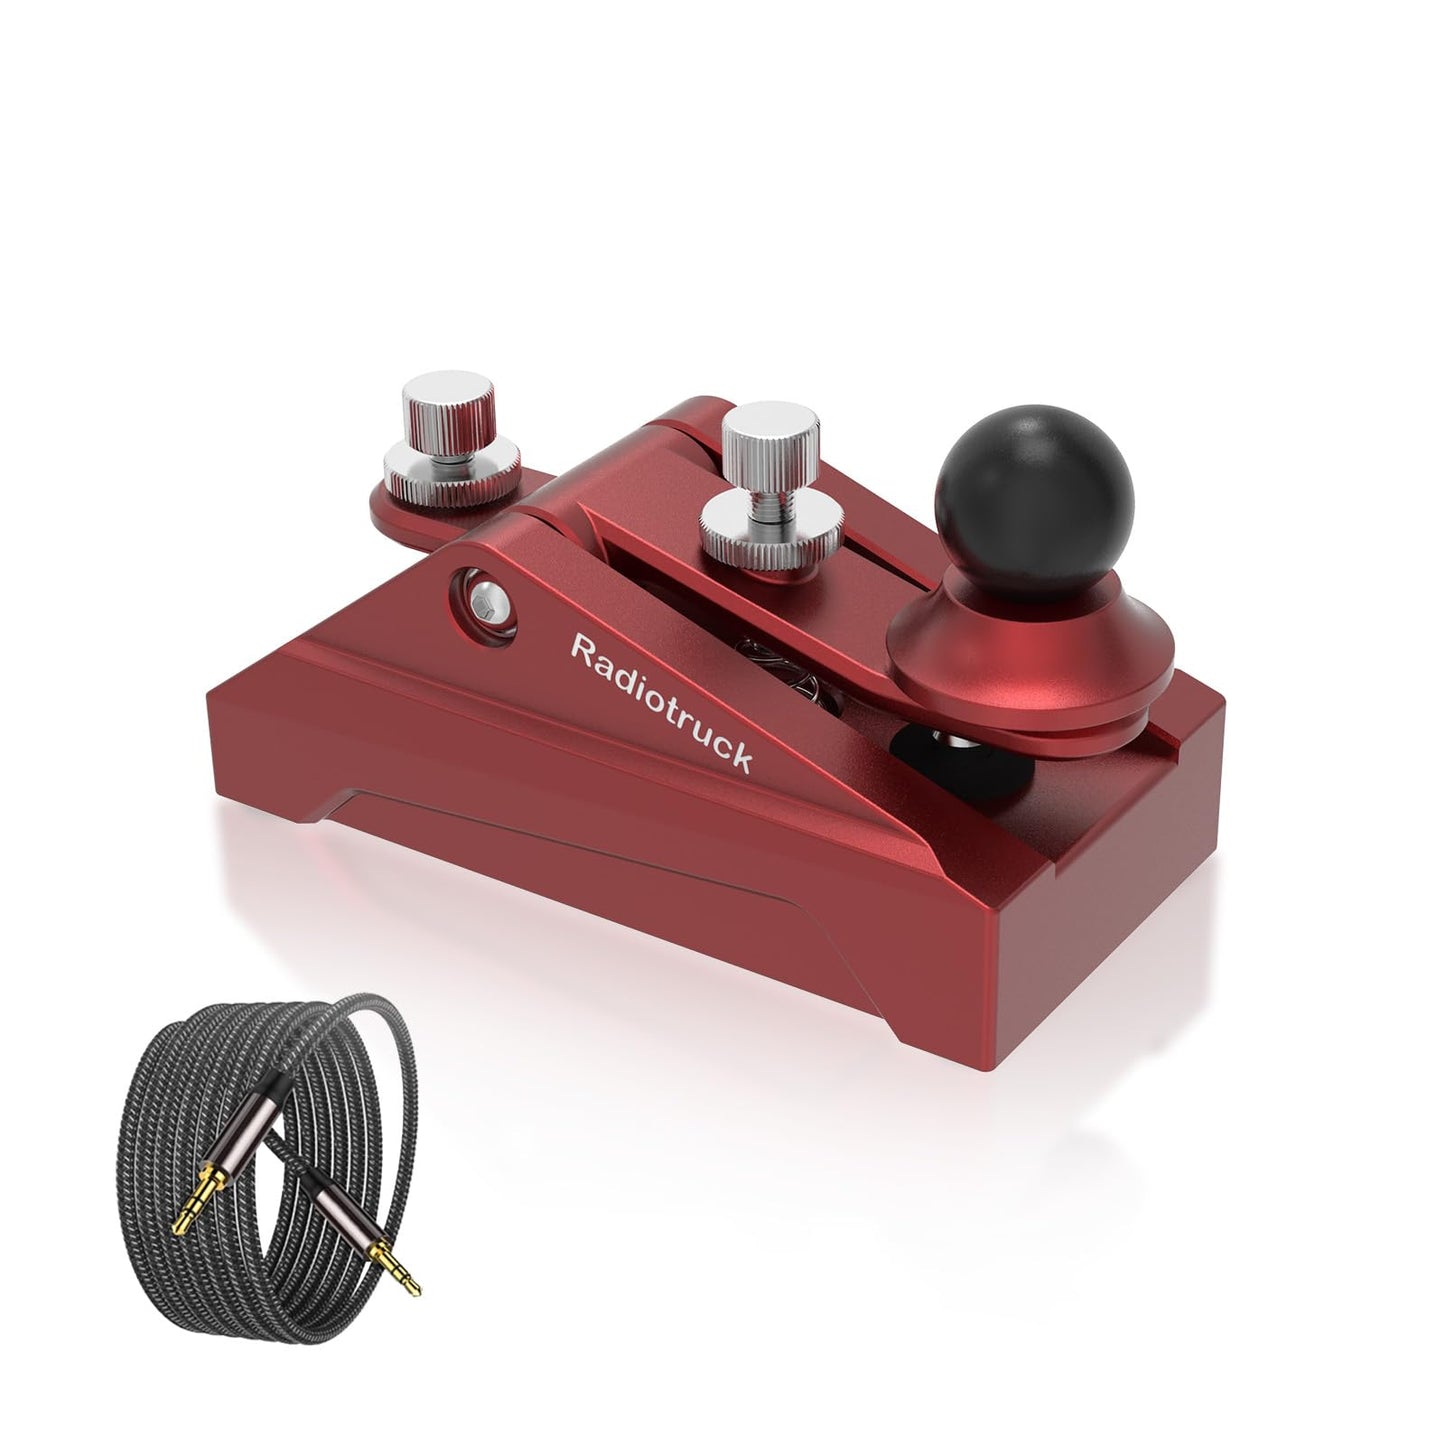 Discover precision with this fully adjustable Morse code key. Crafted from 6061T6 aluminum alloy, anodized for durability. Ergonomic design ensures comfort during extended use. Solid CNC machined from billet aluminum for reliability. Ideal for radio enthusiasts, beginners, and outdoor activities like POTA, SOTA, LOTA. Compact and portable for easy carrying in any radio setup.